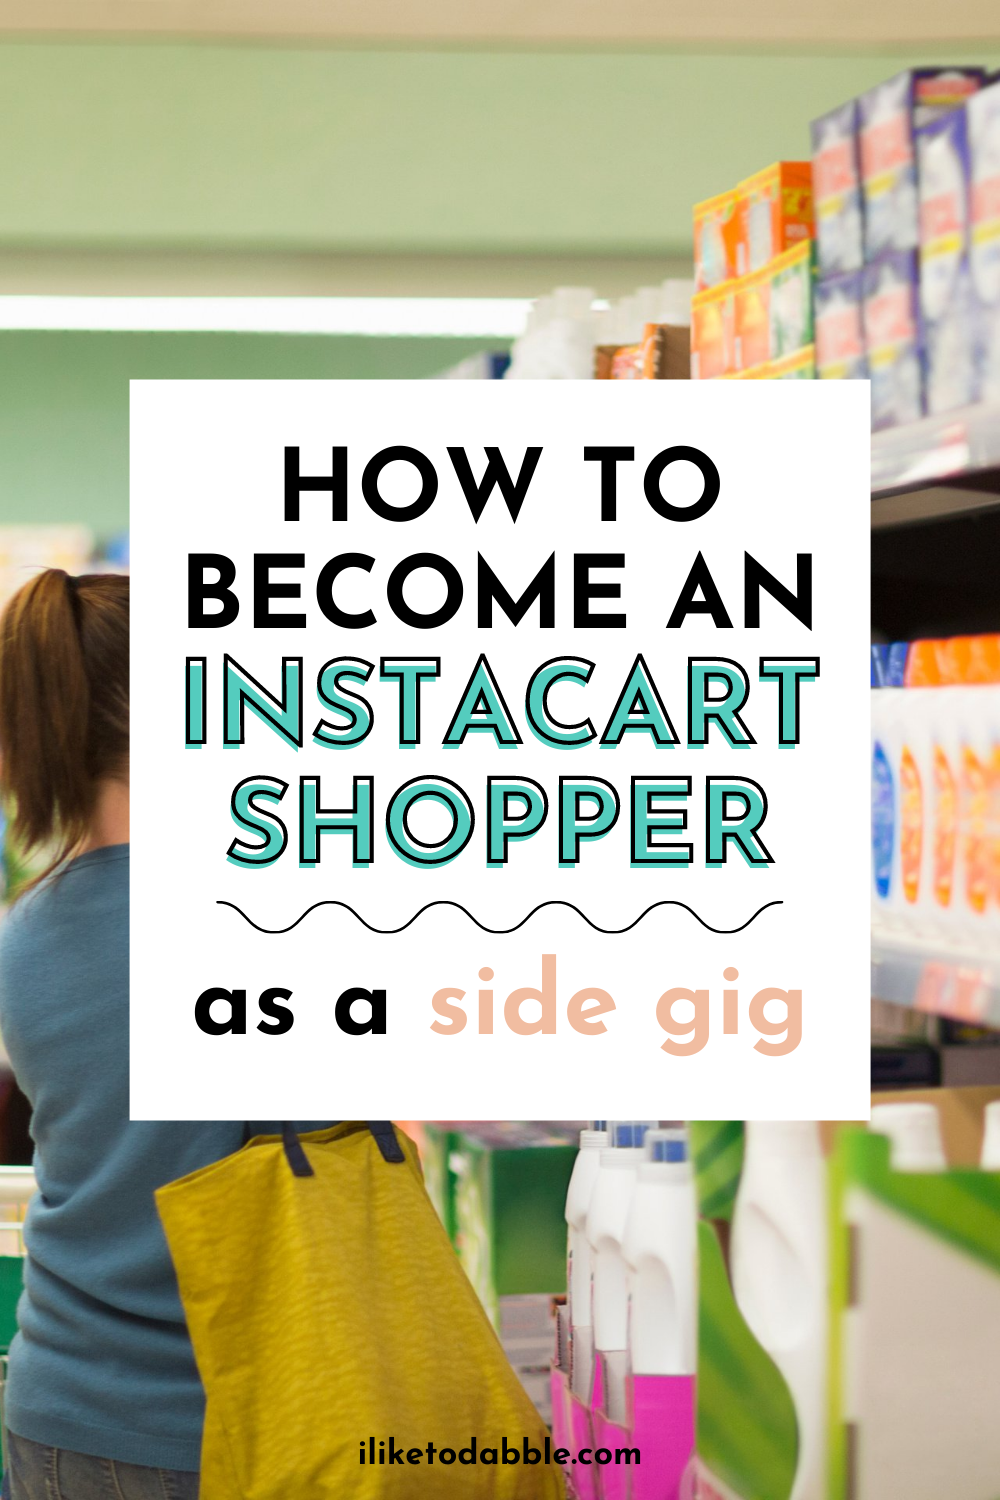 Instacart shopper in a grocery store with text overlay that reads: how to become an instacart shopper as a side gig